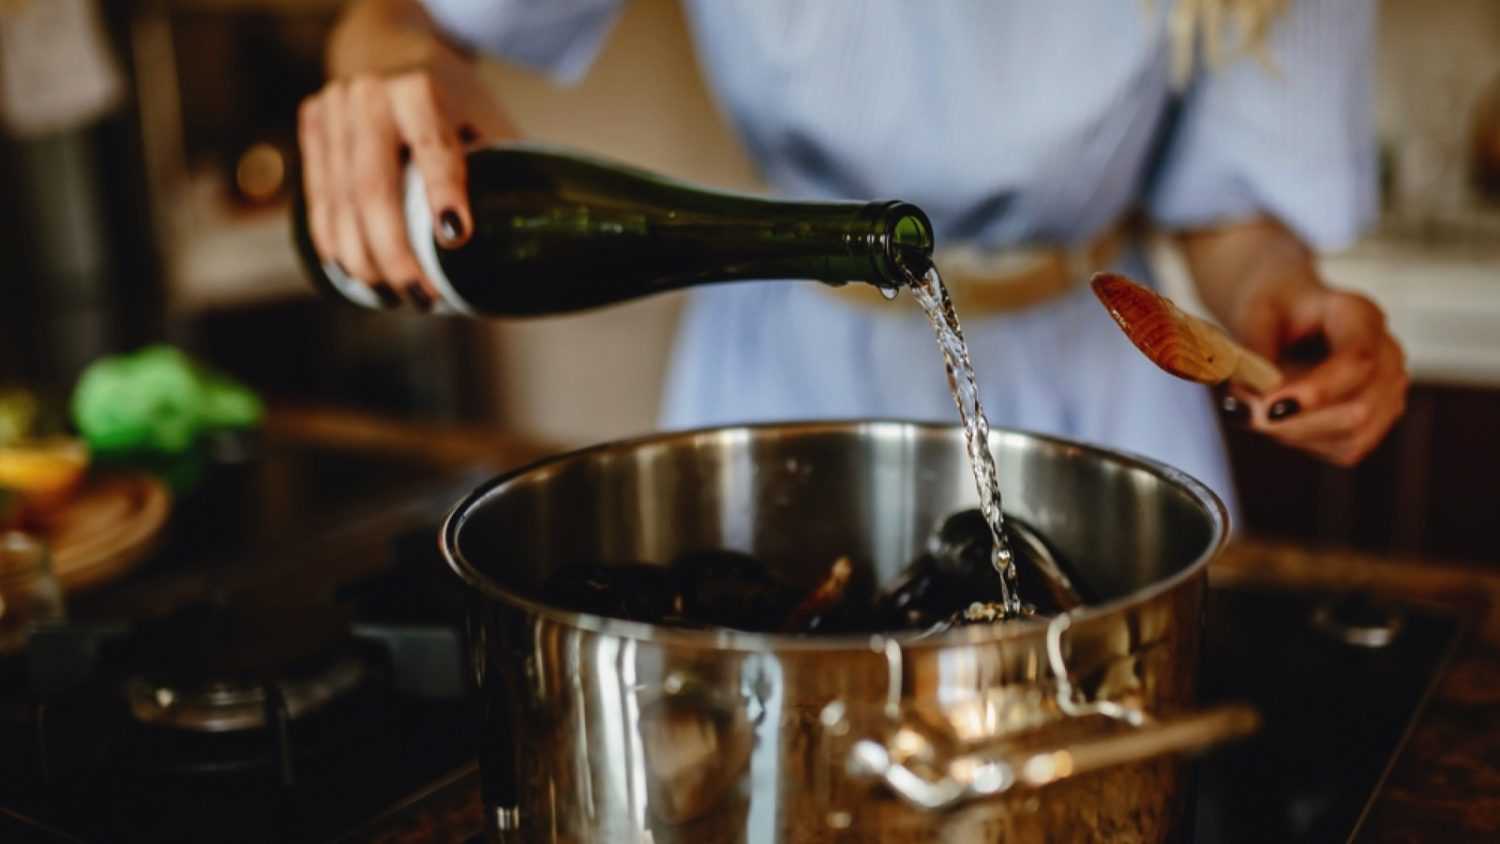 Girl adding wine to cooking